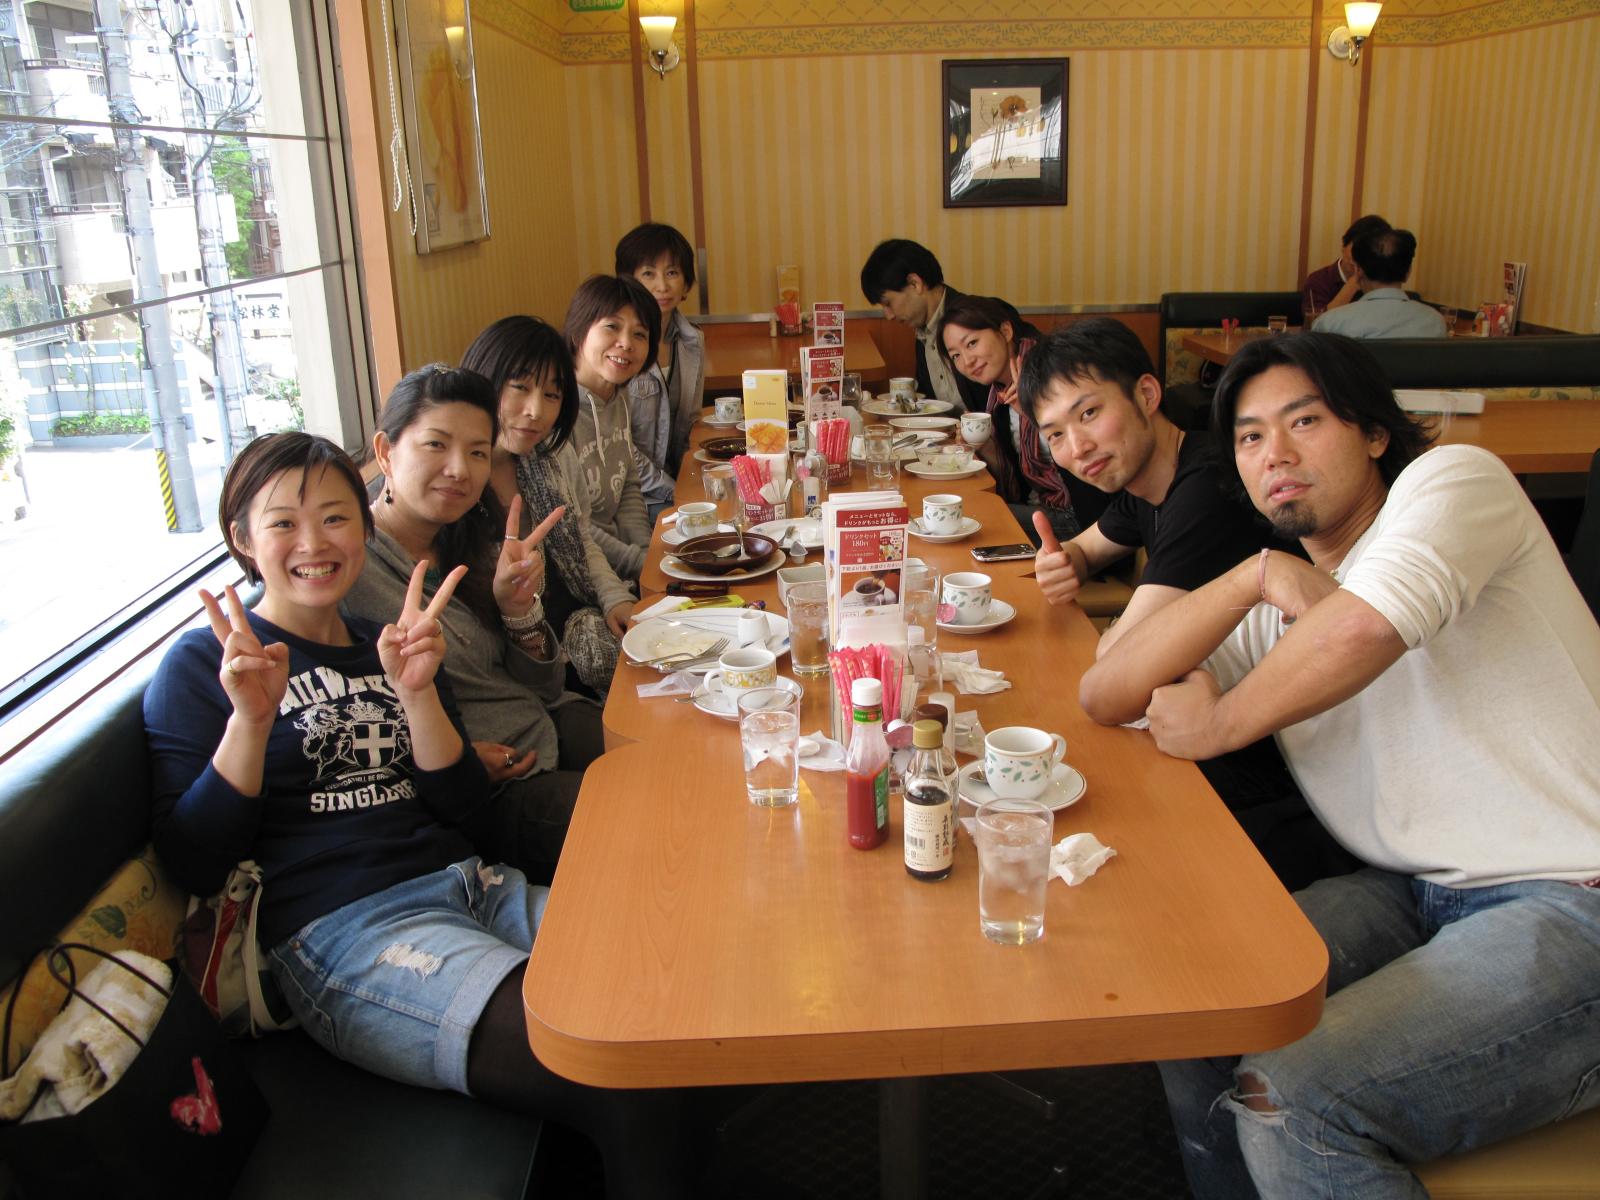 a group of people pose for a picture at a restaurant table